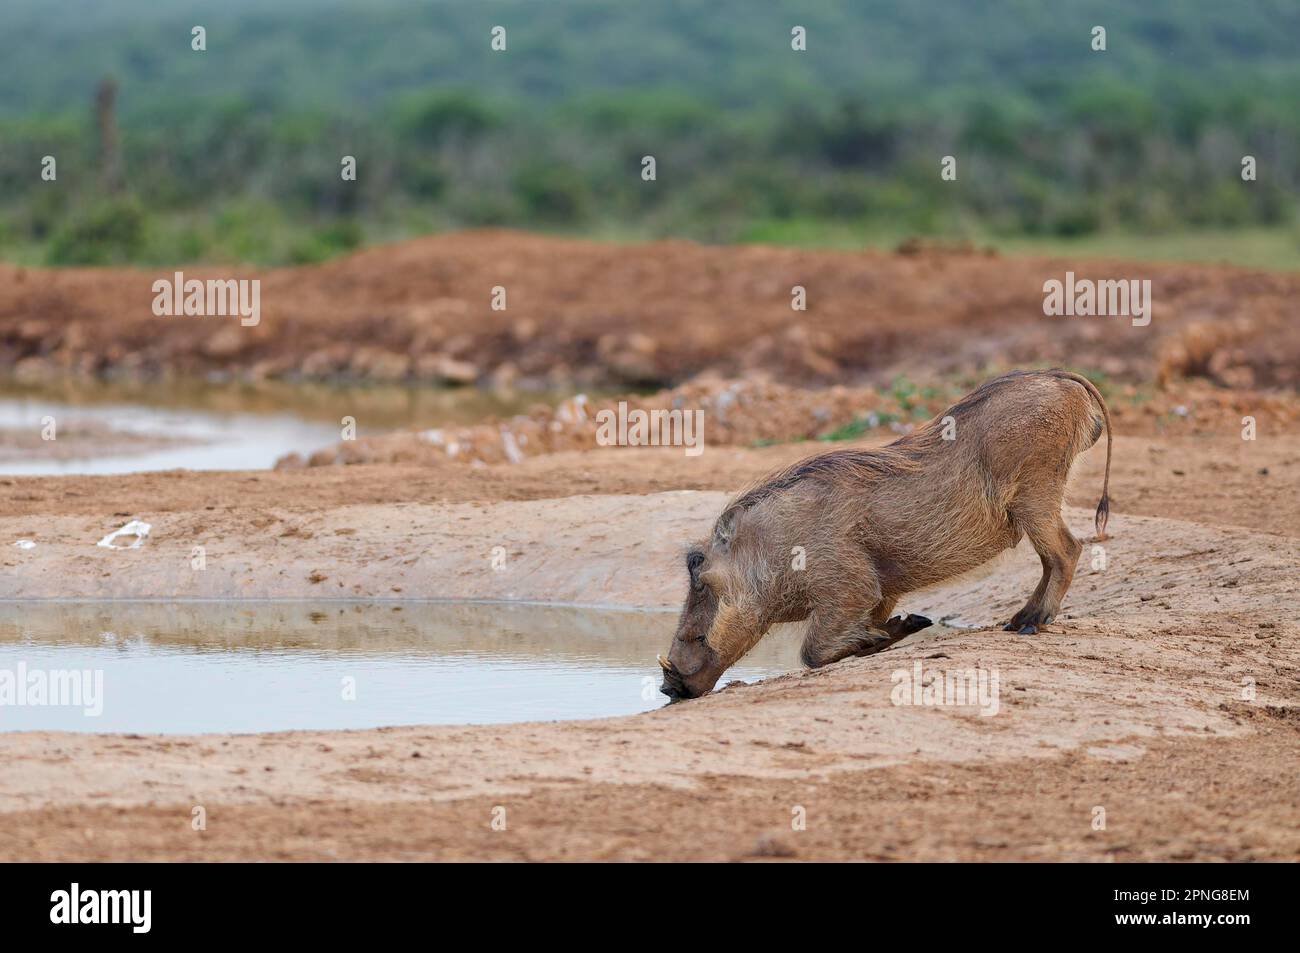 Common warthog (Phacochoerus africanus), knelling adult male drinking at waterhole, Addo Elephant National Park, Eastern Cape, South Africa, Africa Stock Photo